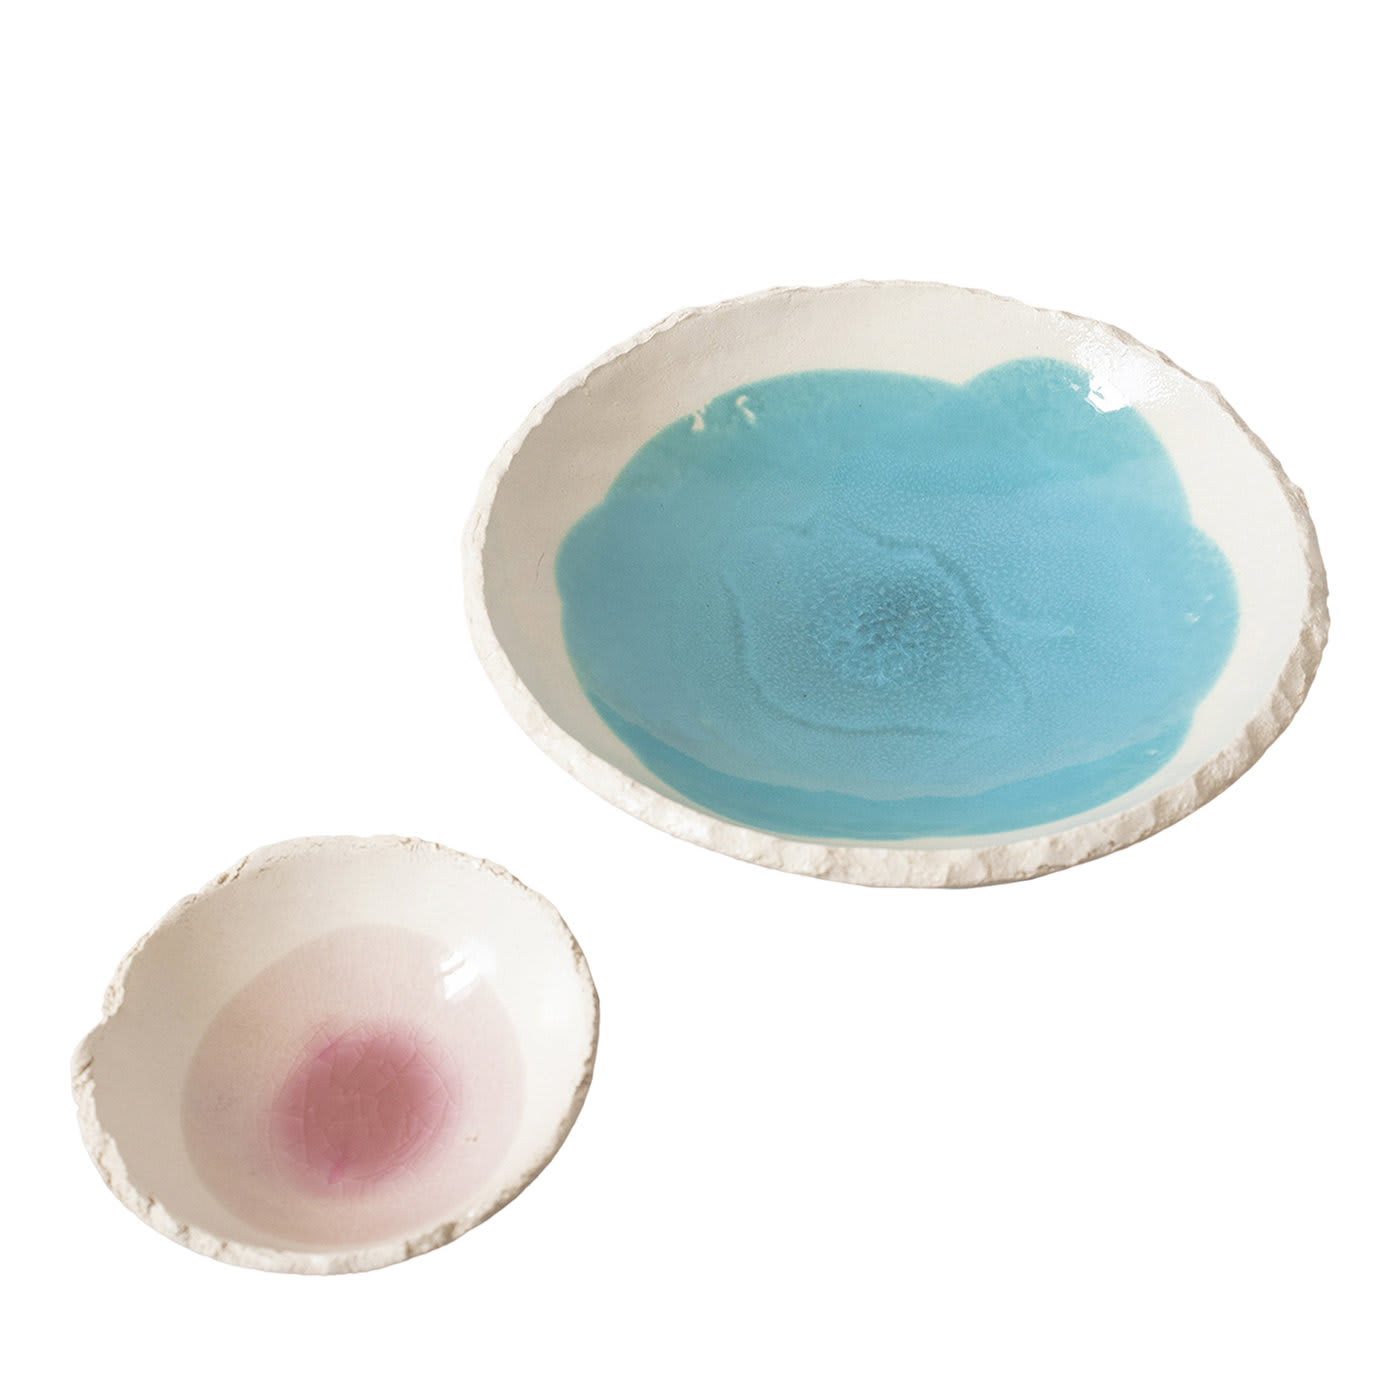 Gusci Set of Large Turquoise and Small Pink Bowls - Gianfranco Conte